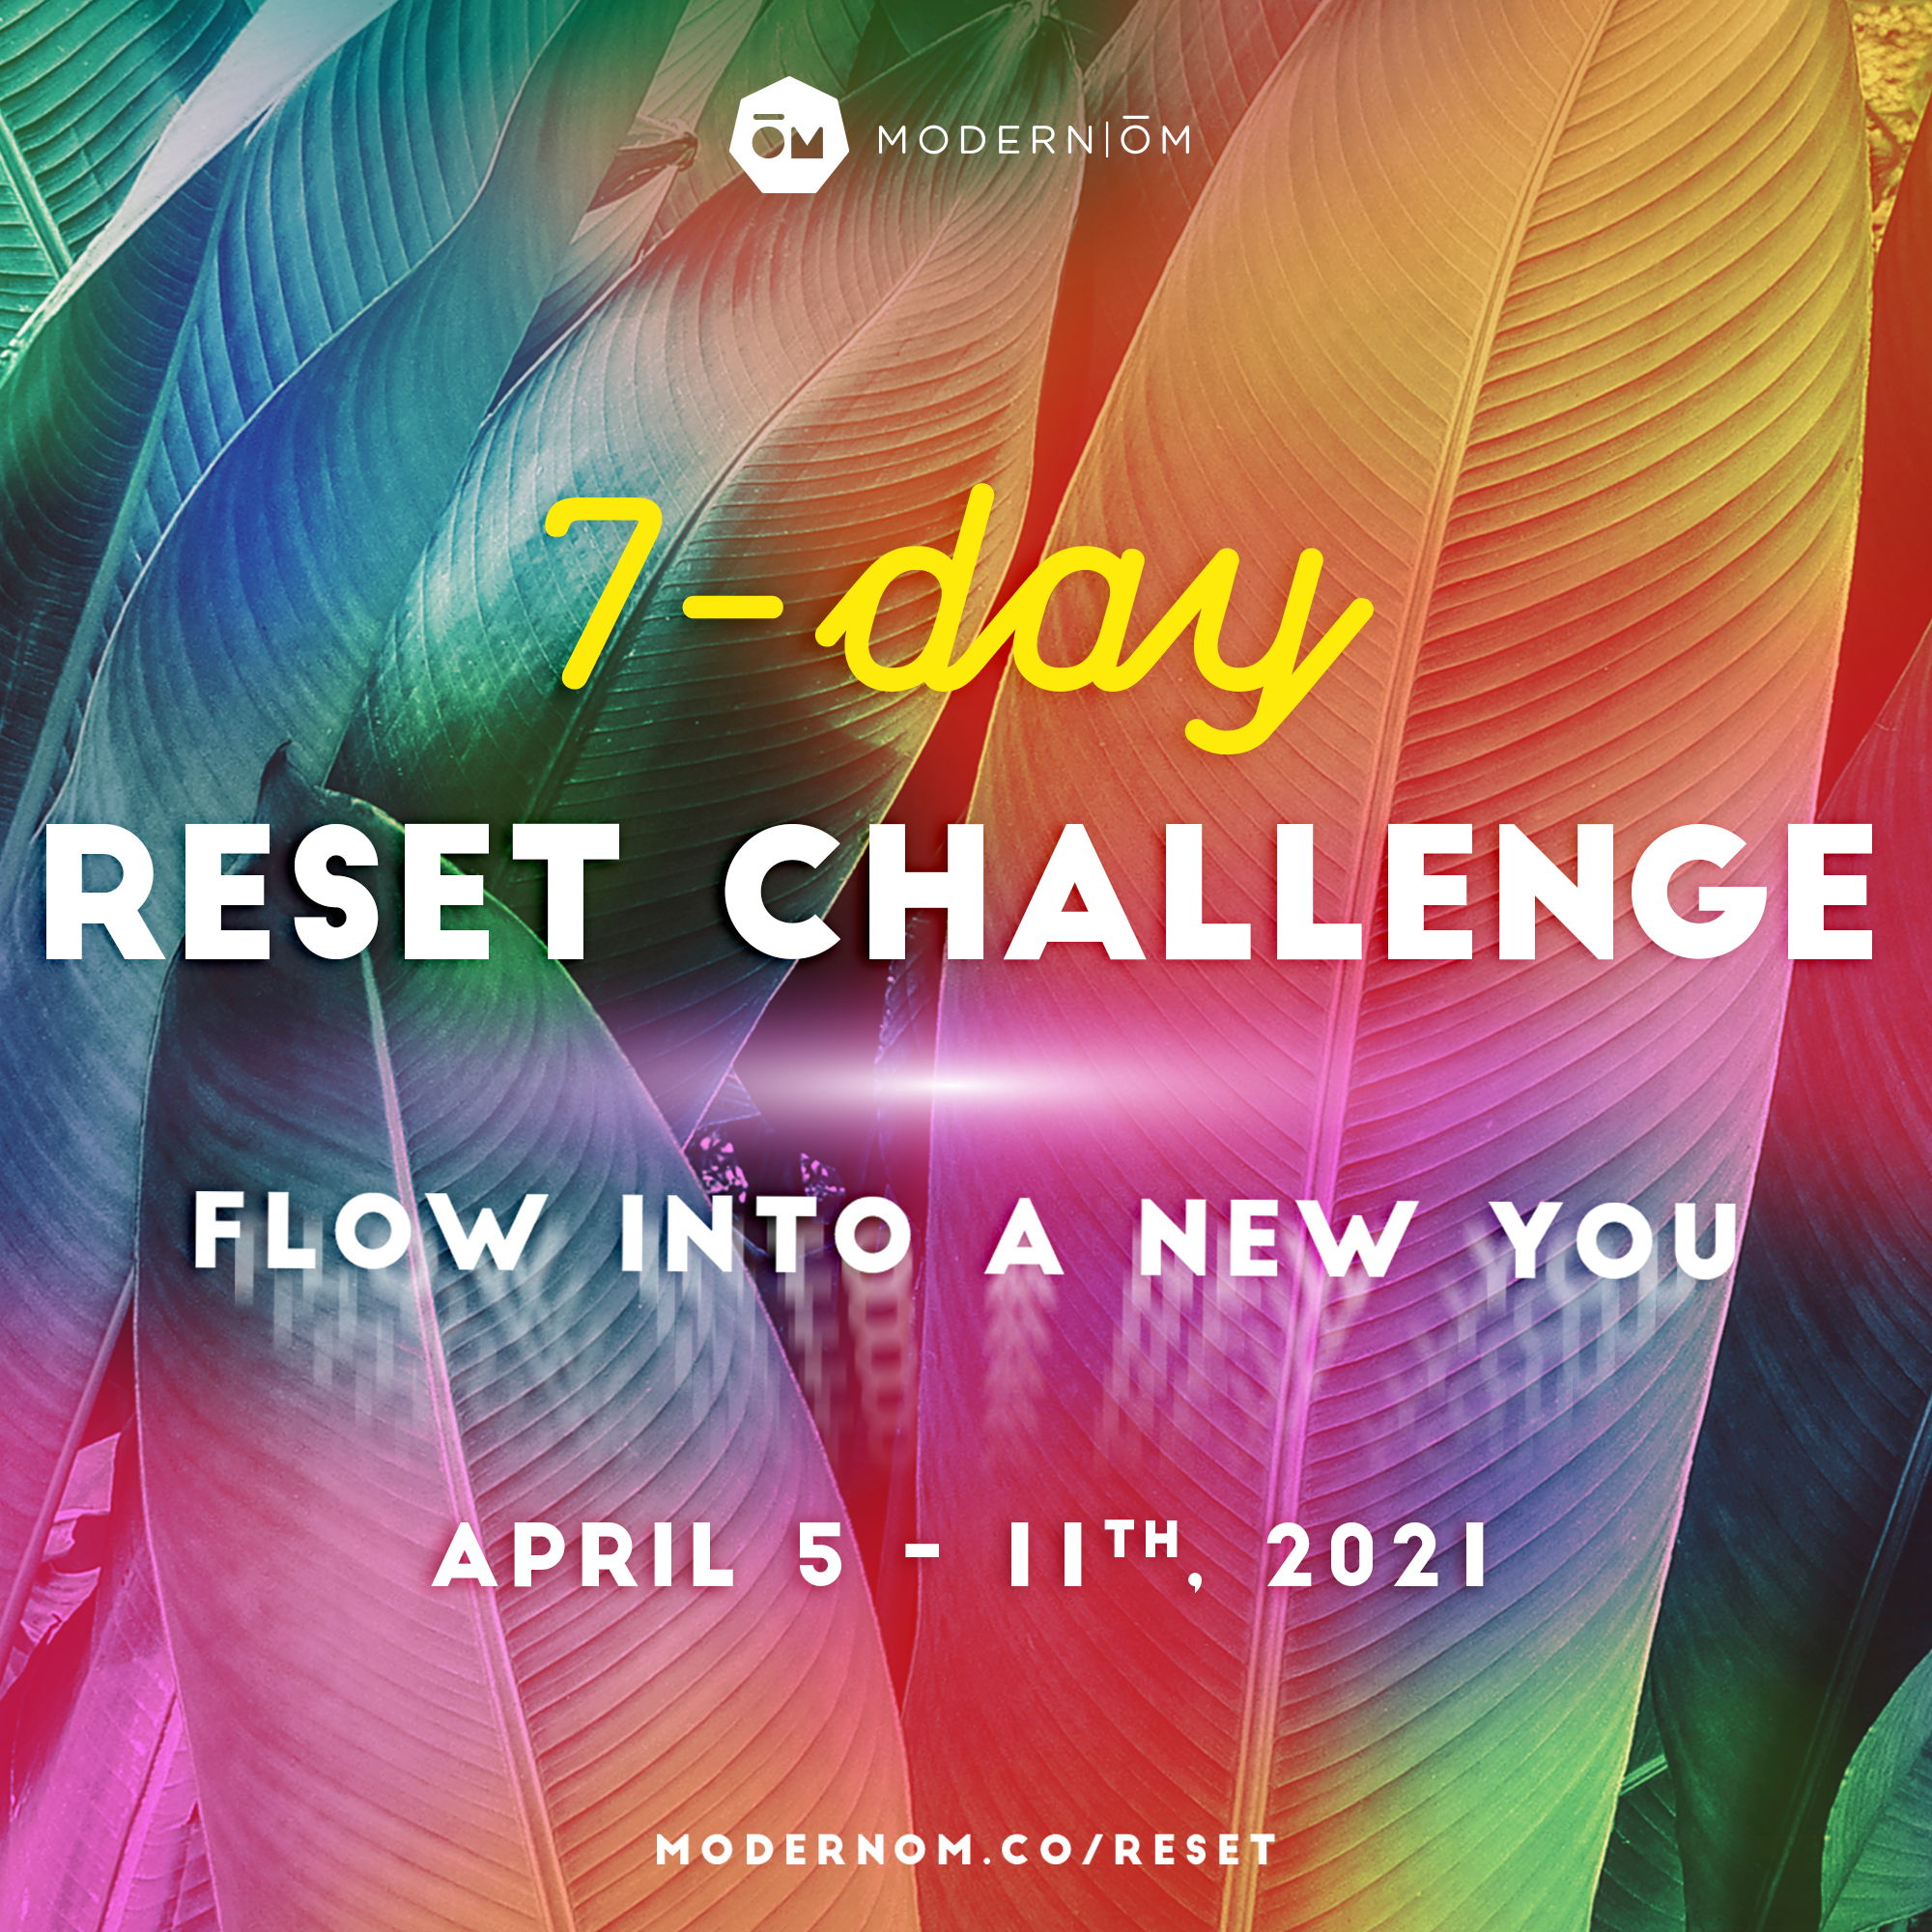 7-day-reset-challenge-events-universe